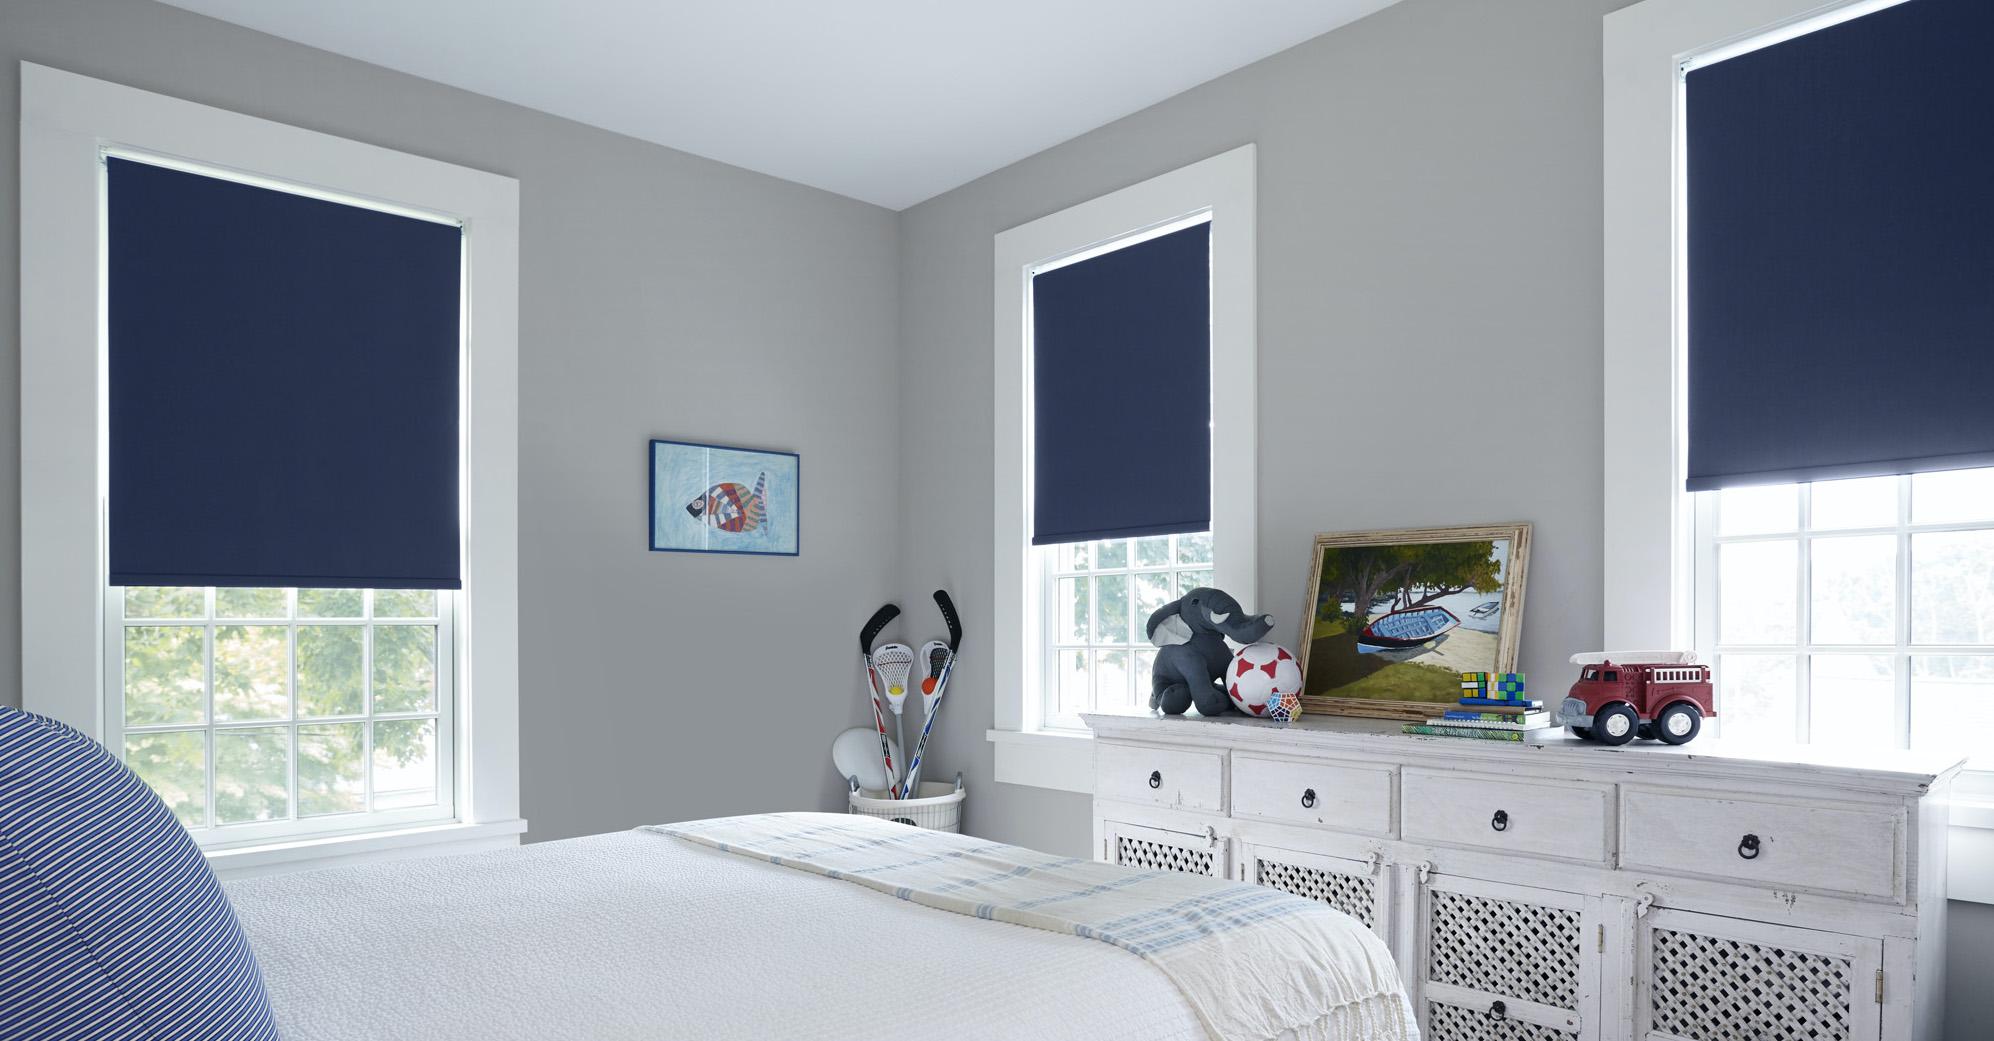 All vinyl roller shades help keep out the light, like you see her in this guest bedroom window treatment